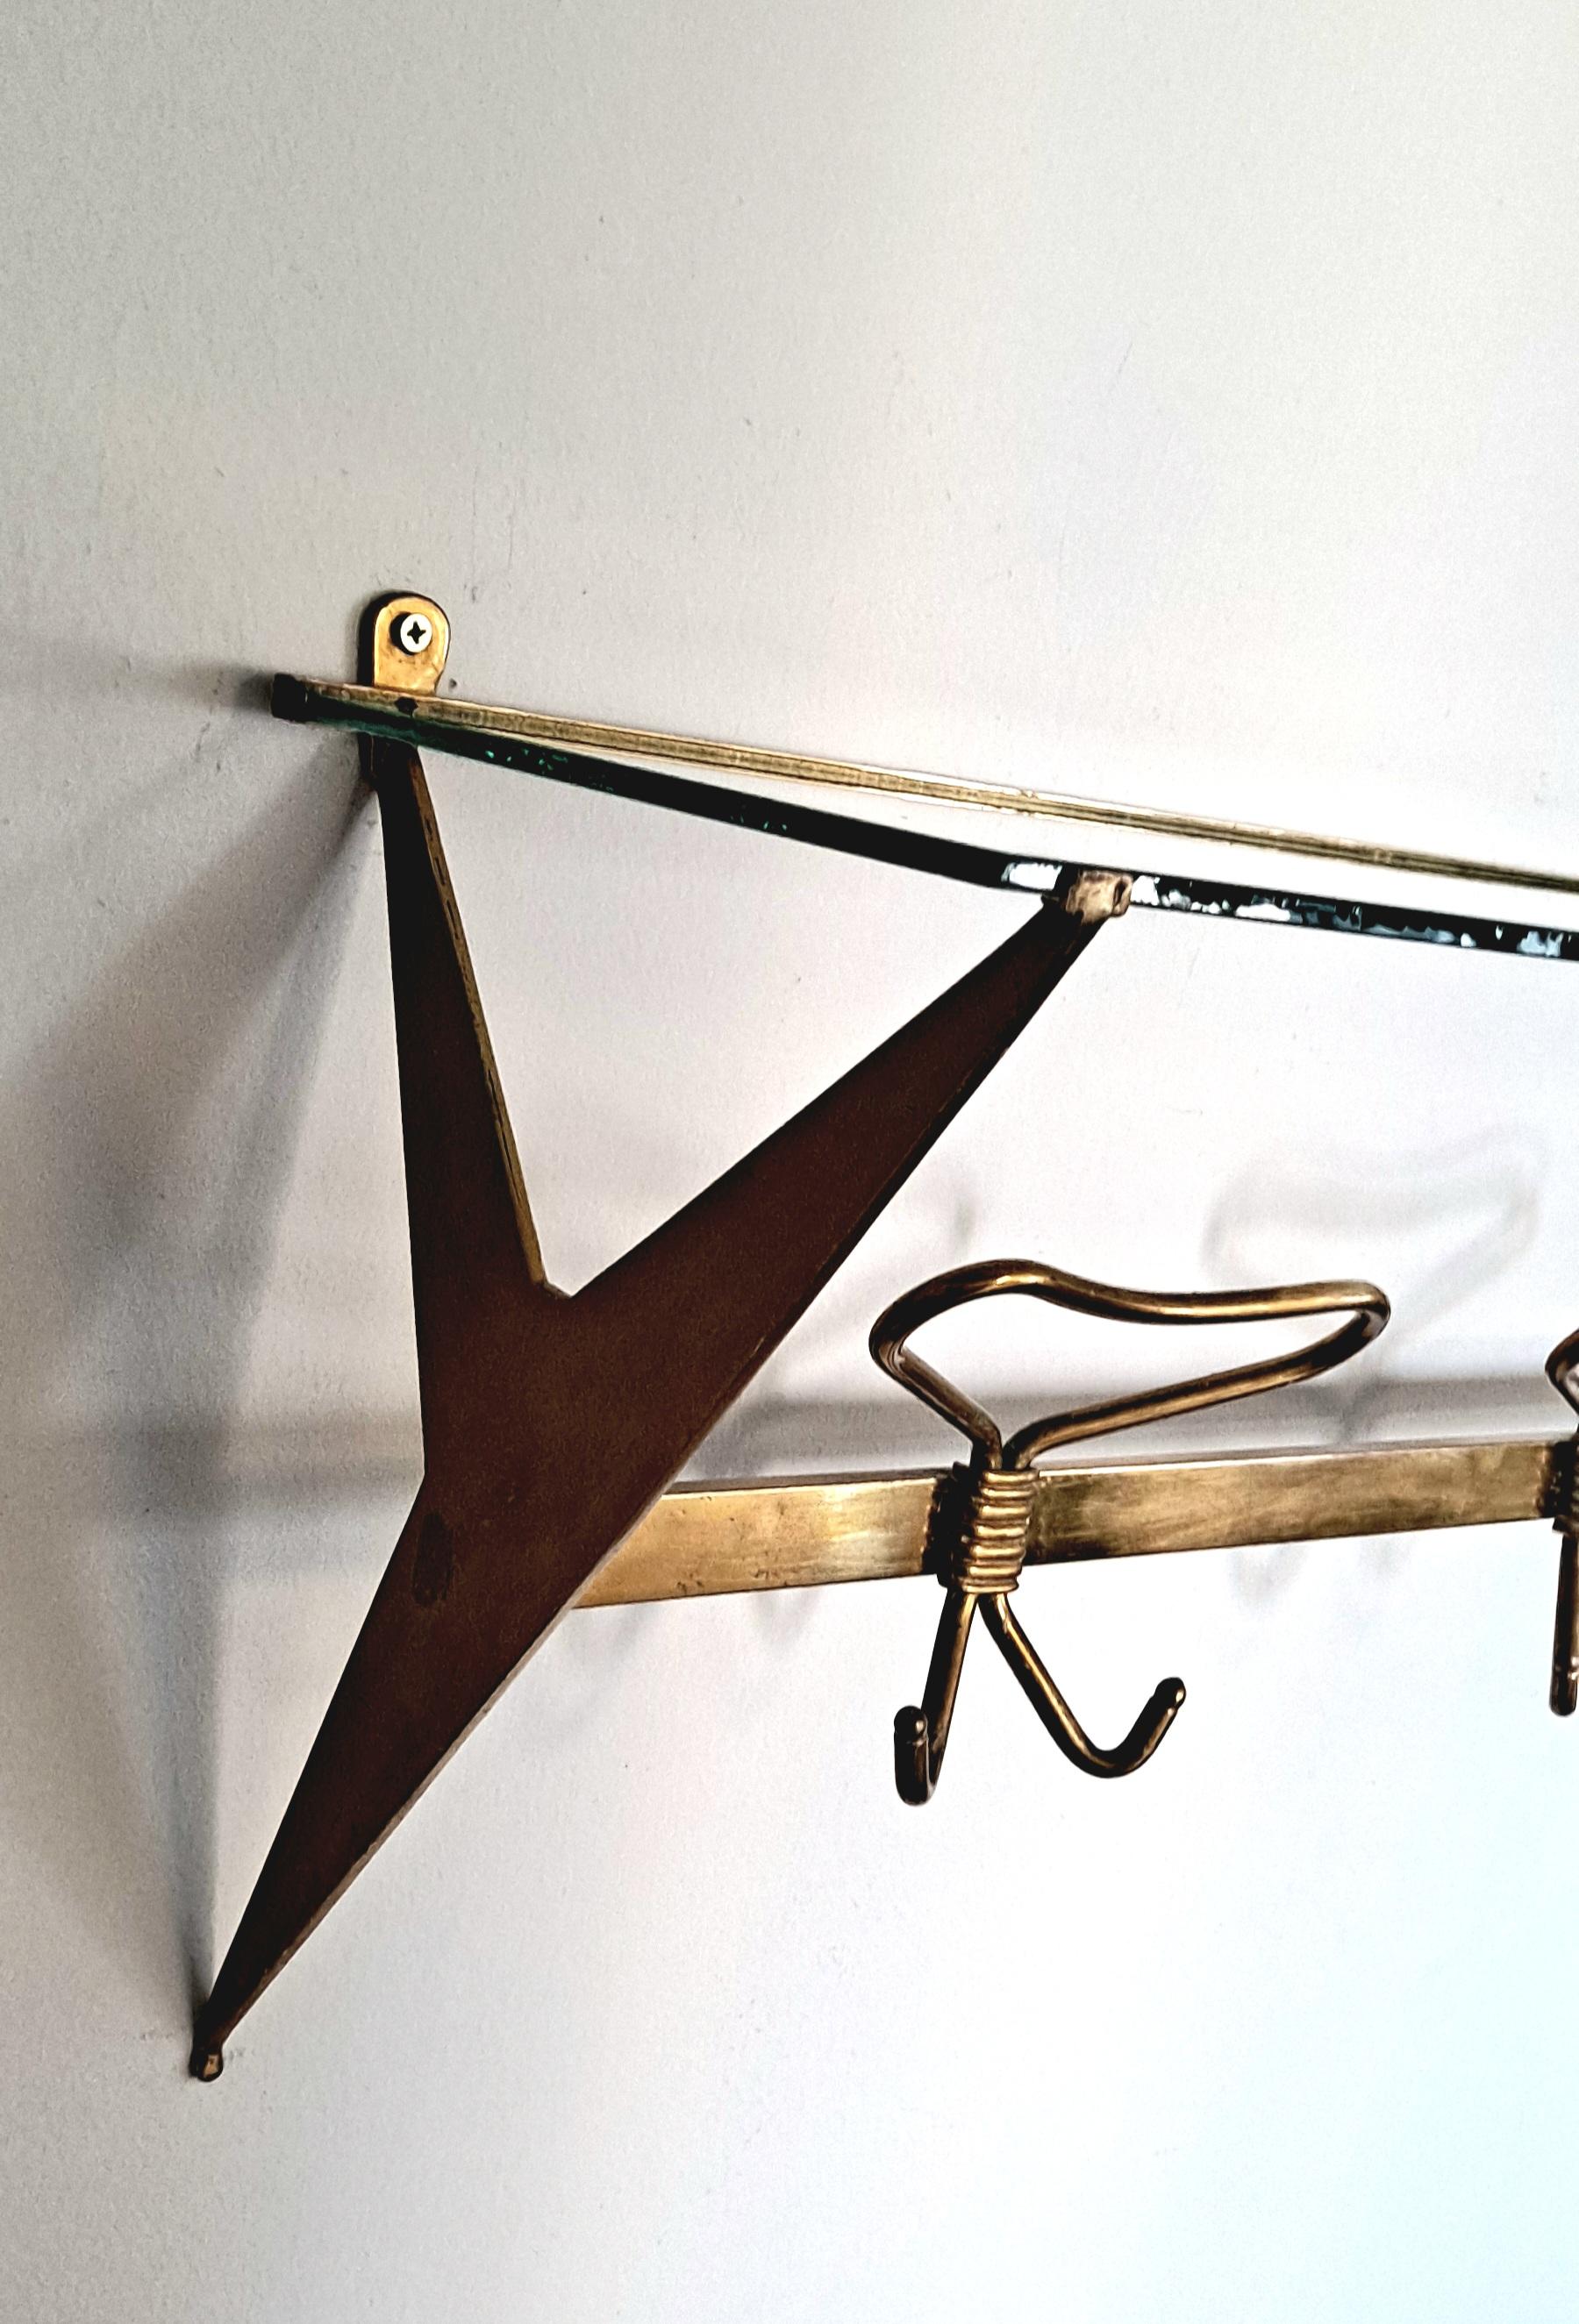  Italian Brass Wall Mounted Coat Rack Shelf  Attributed to Fontana Arte  In Good Condition For Sale In Los Angeles, CA